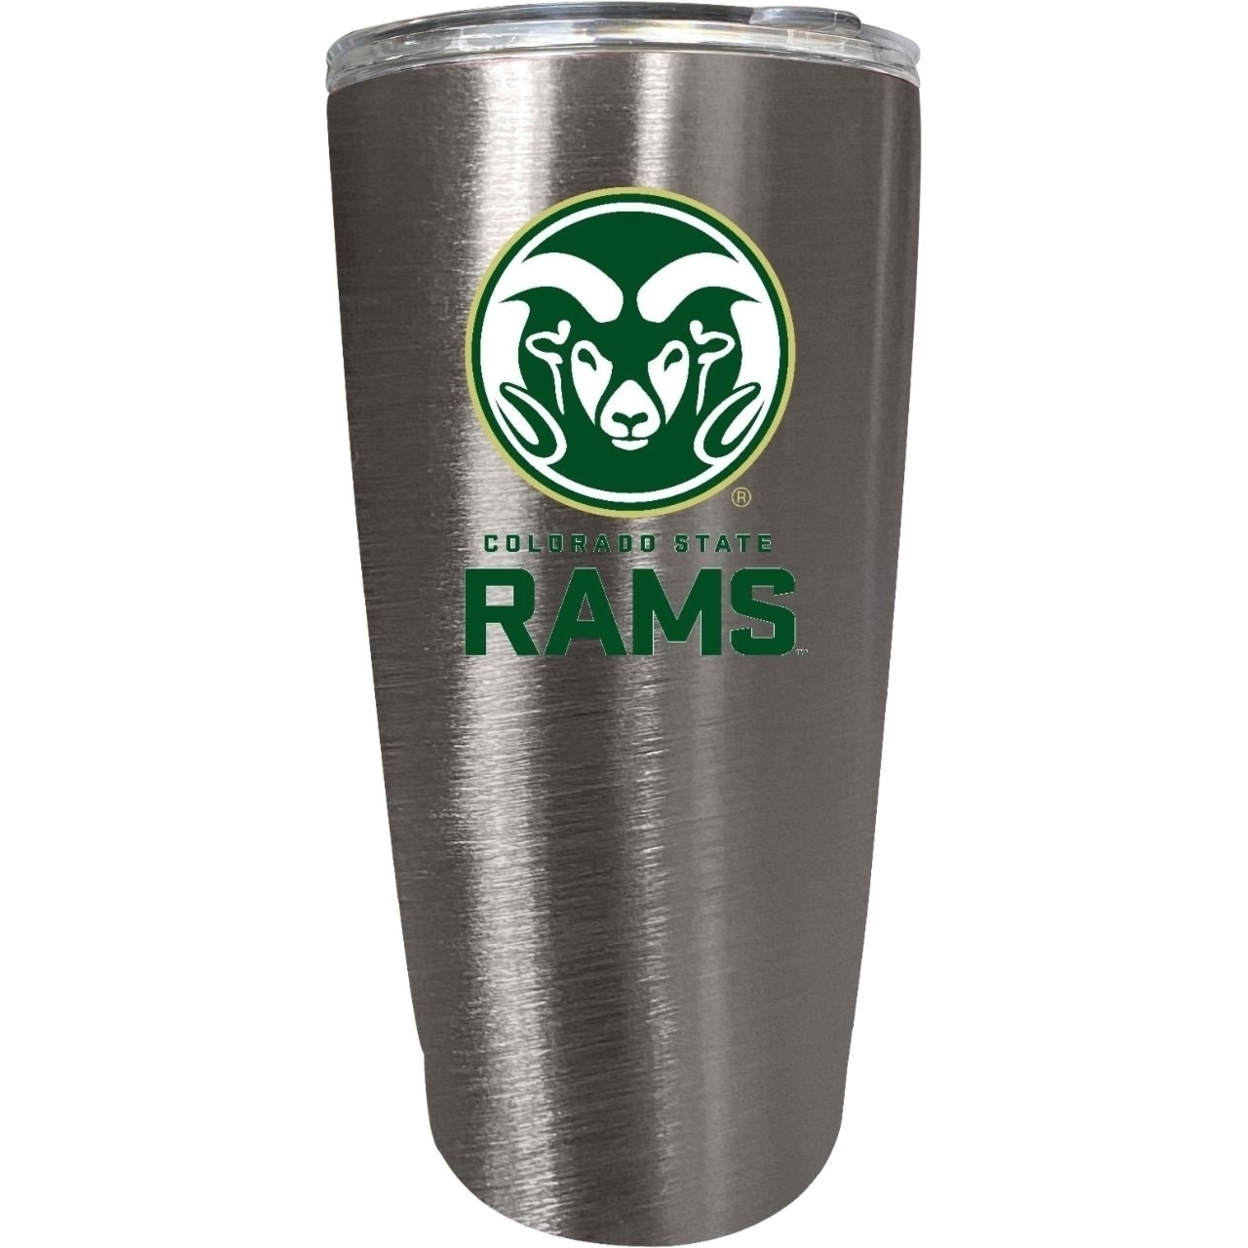 Colorado State Rams 16 Oz Insulated Stainless Steel Tumbler Colorless